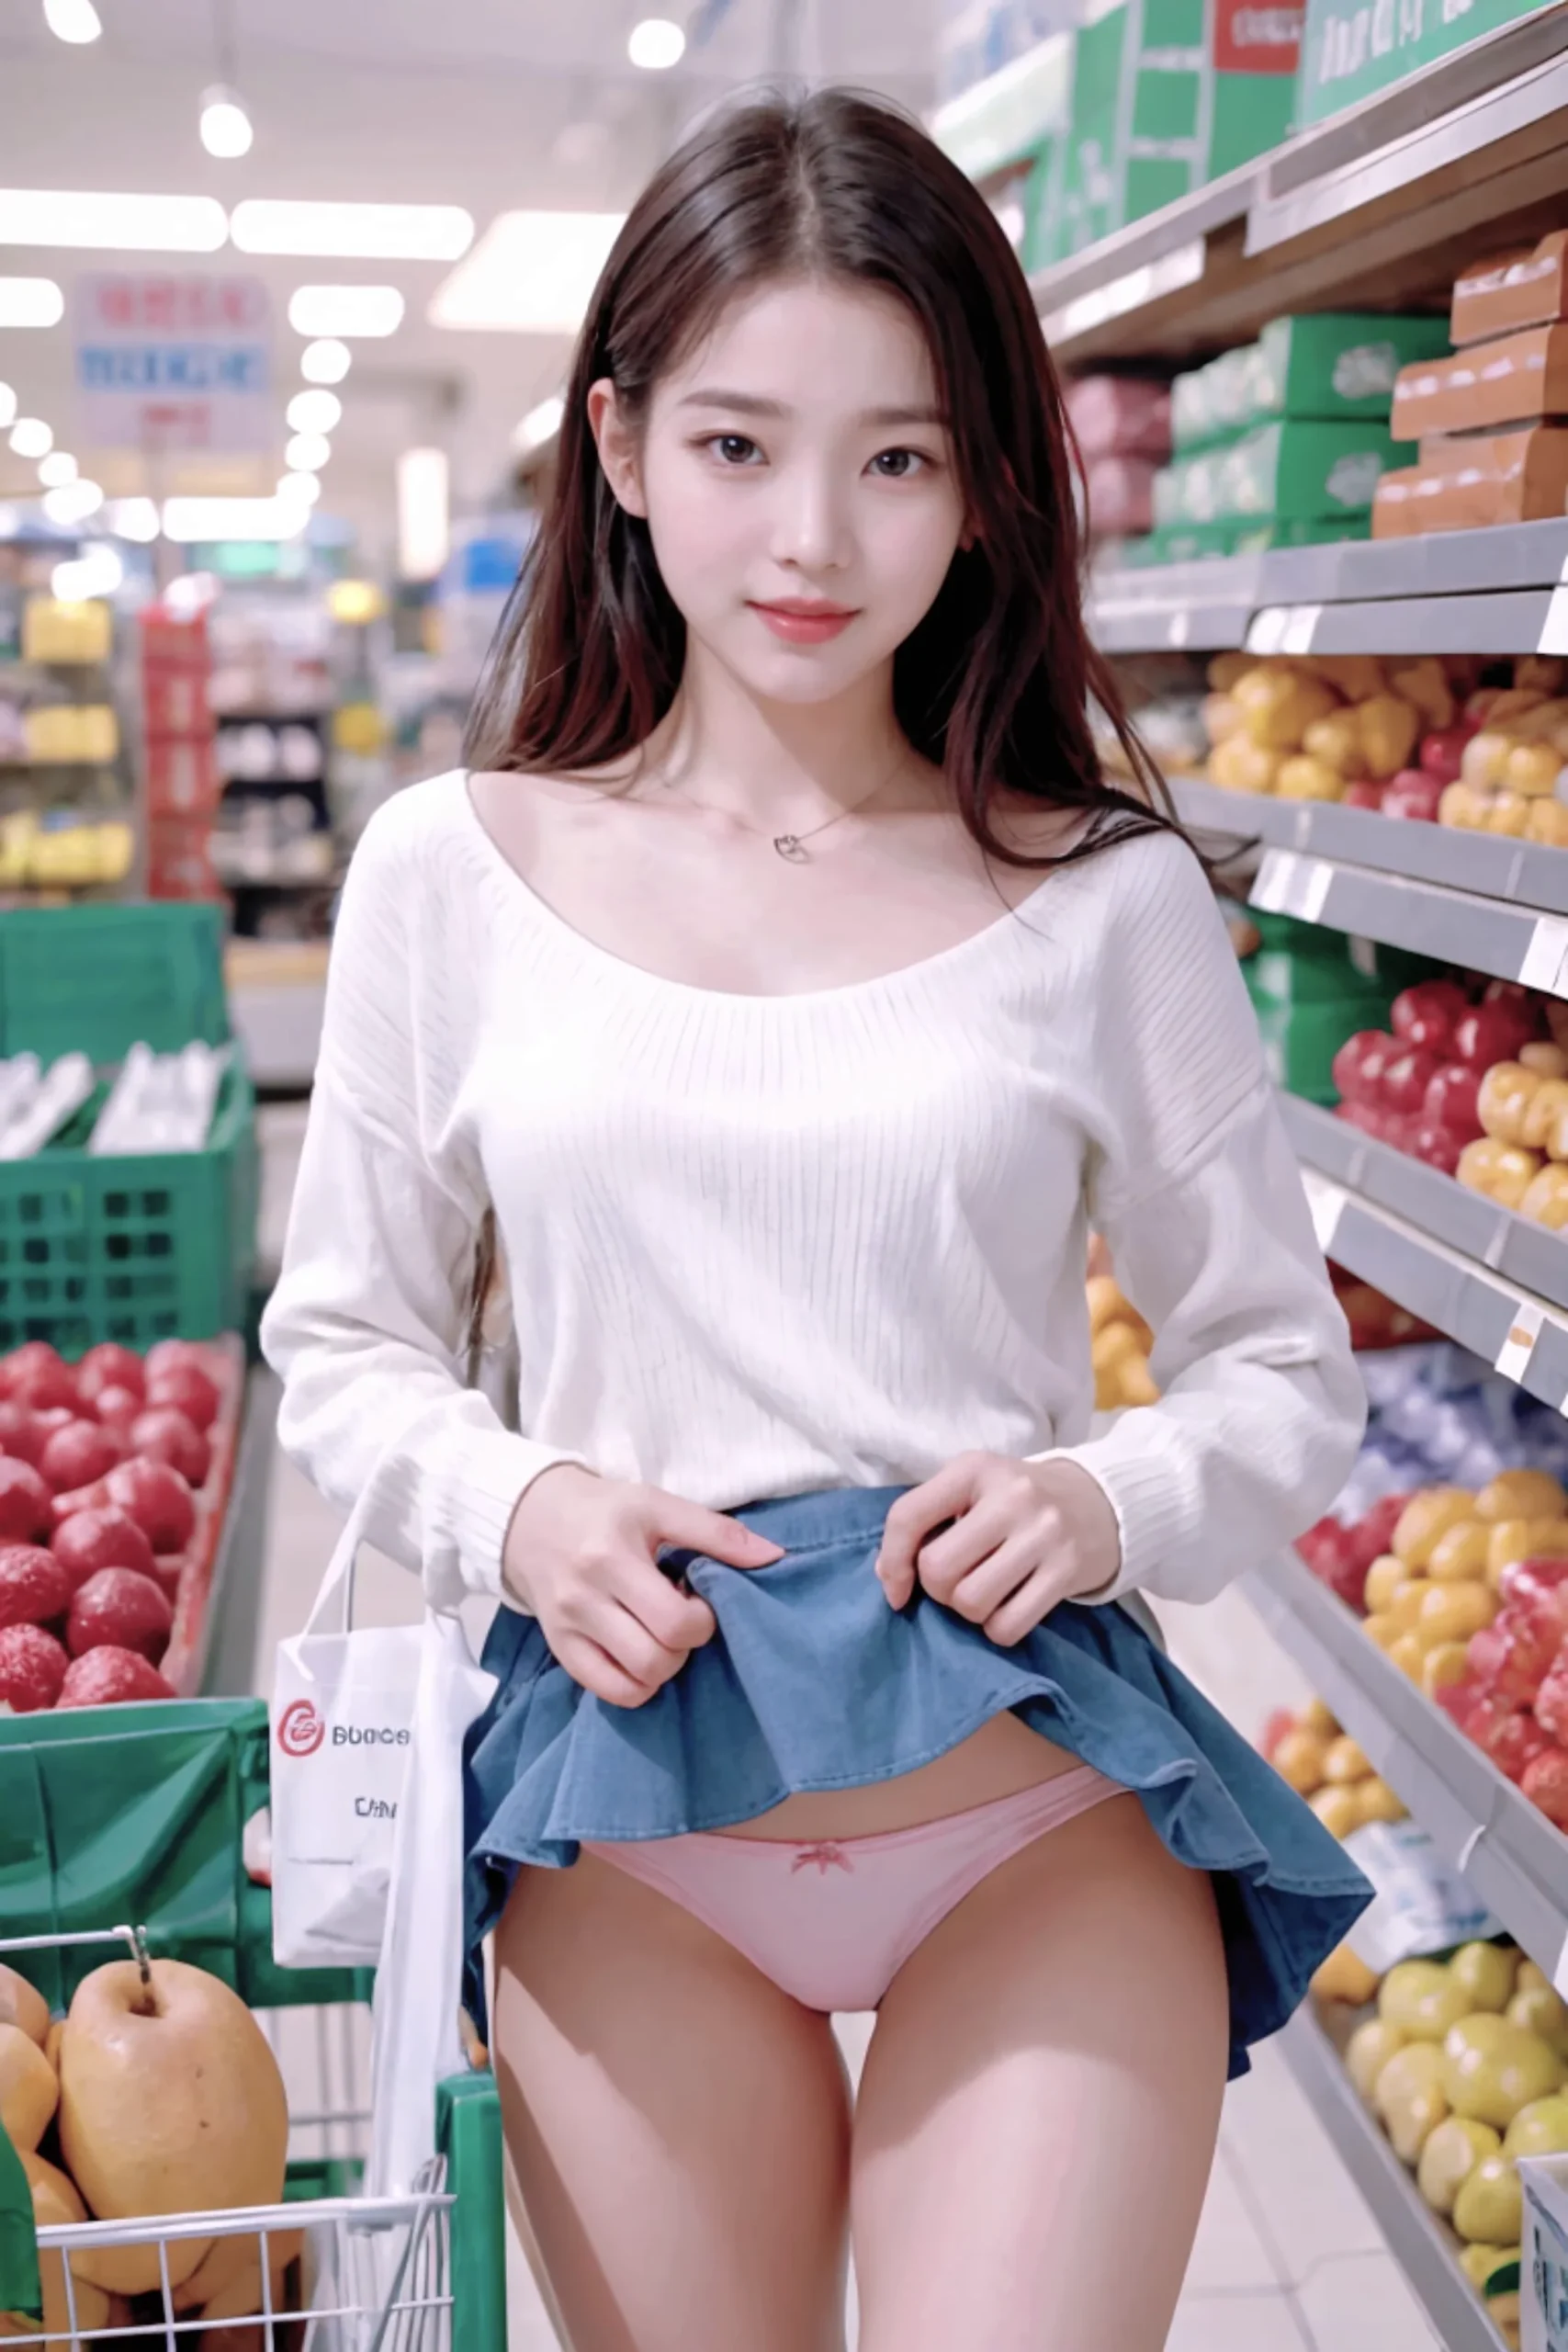 Young Lady Flashing Panties In A Store Images 20